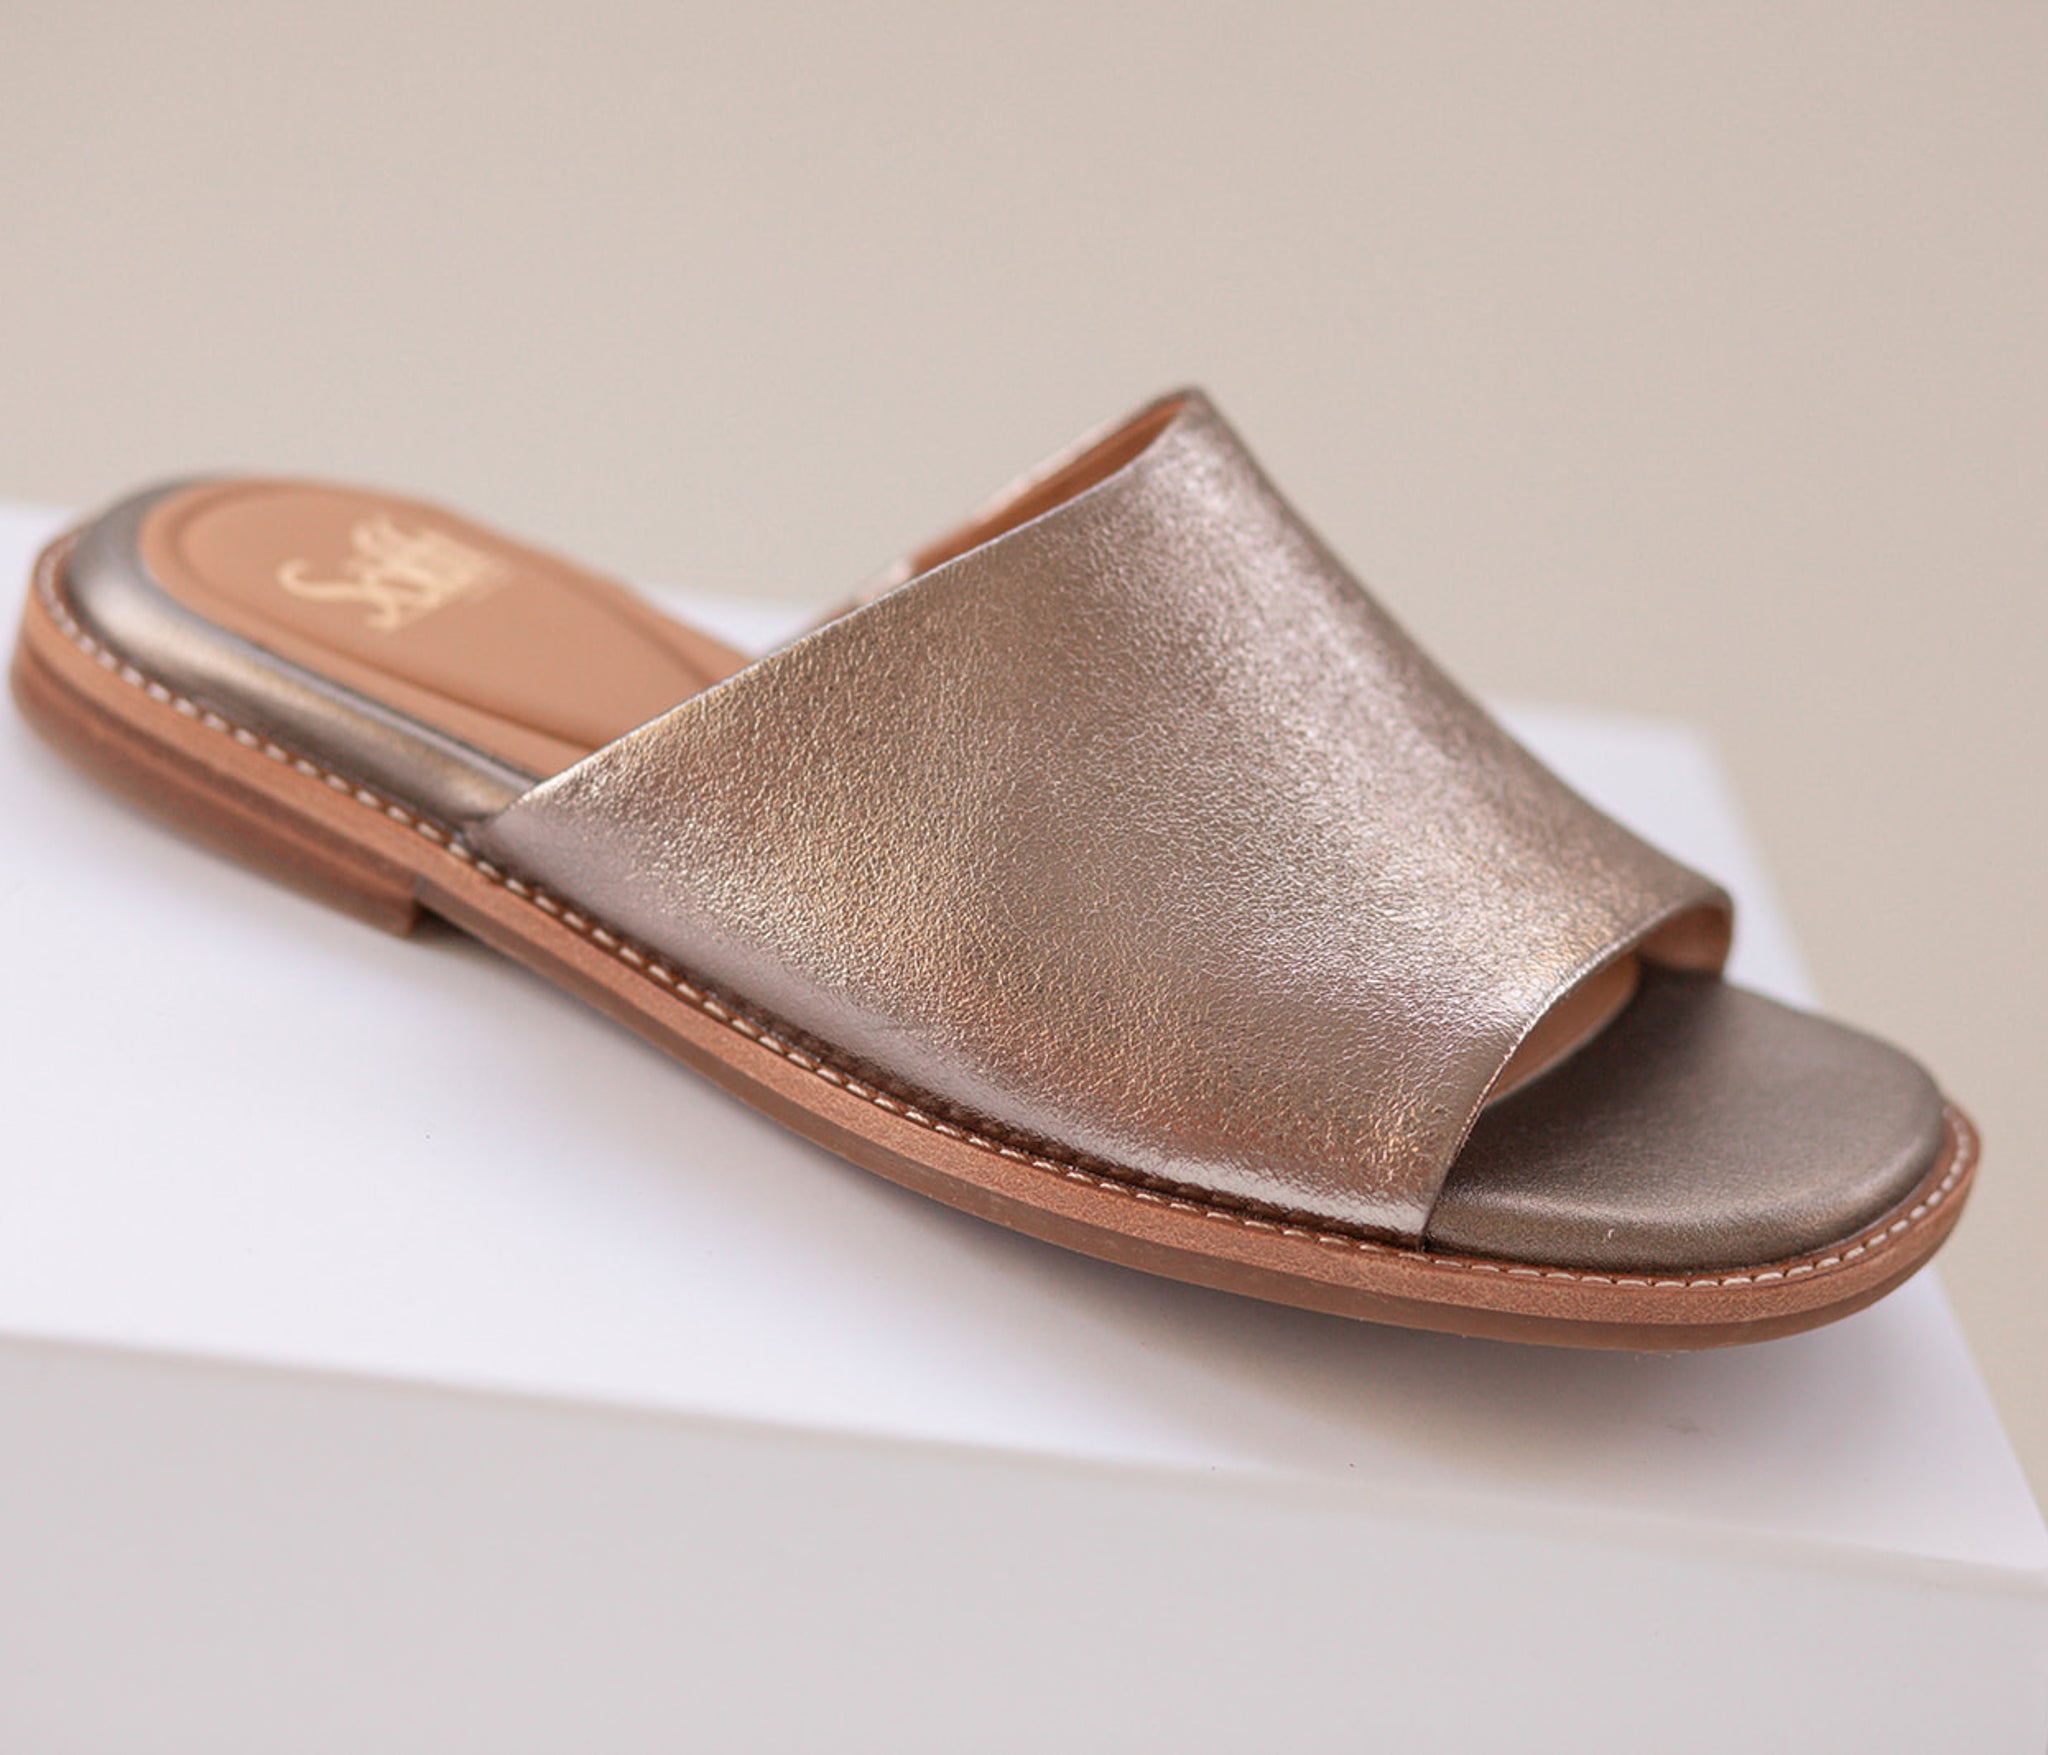 Noble Italian Leather Slide Sandals in Silver Bronze by Sofft Shoes